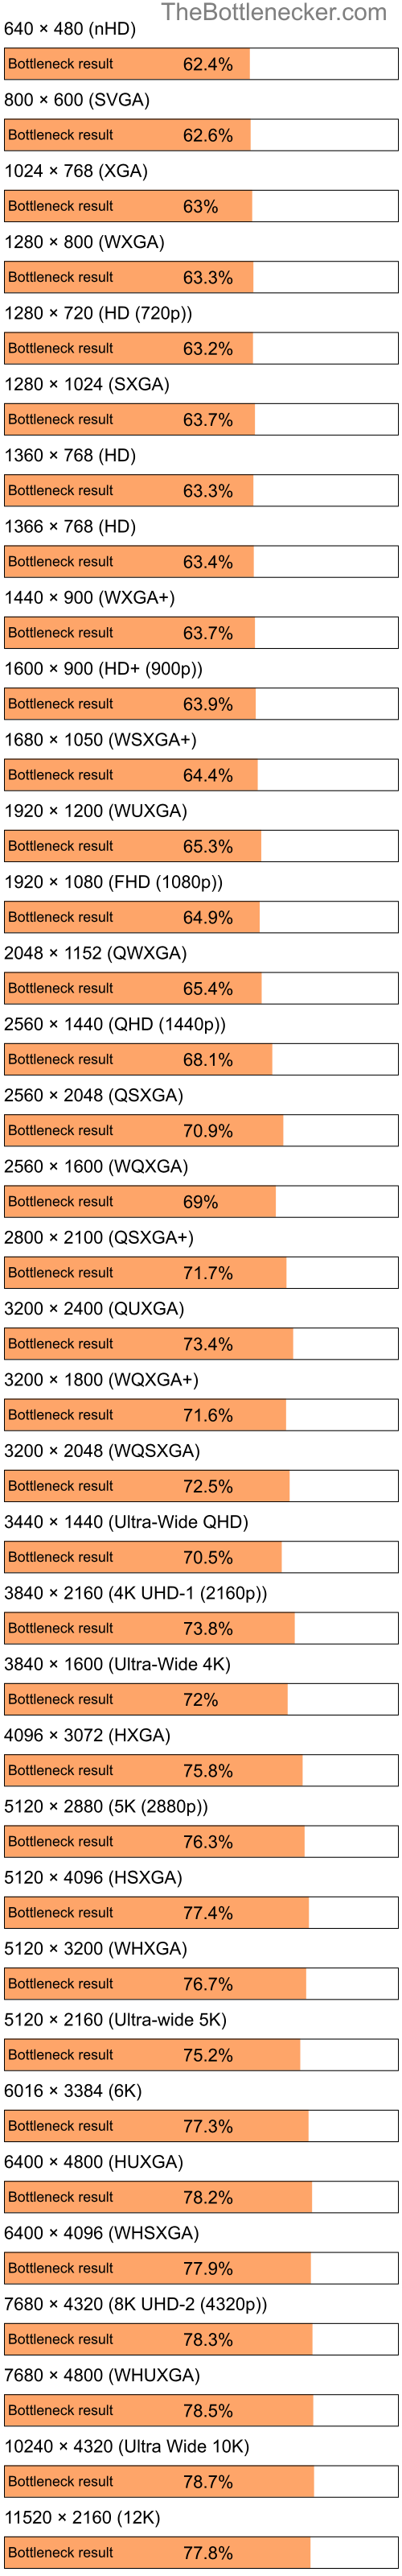 Bottleneck results by resolution for Intel Celeron and AMD Mobility Radeon HD 4200 in General Tasks